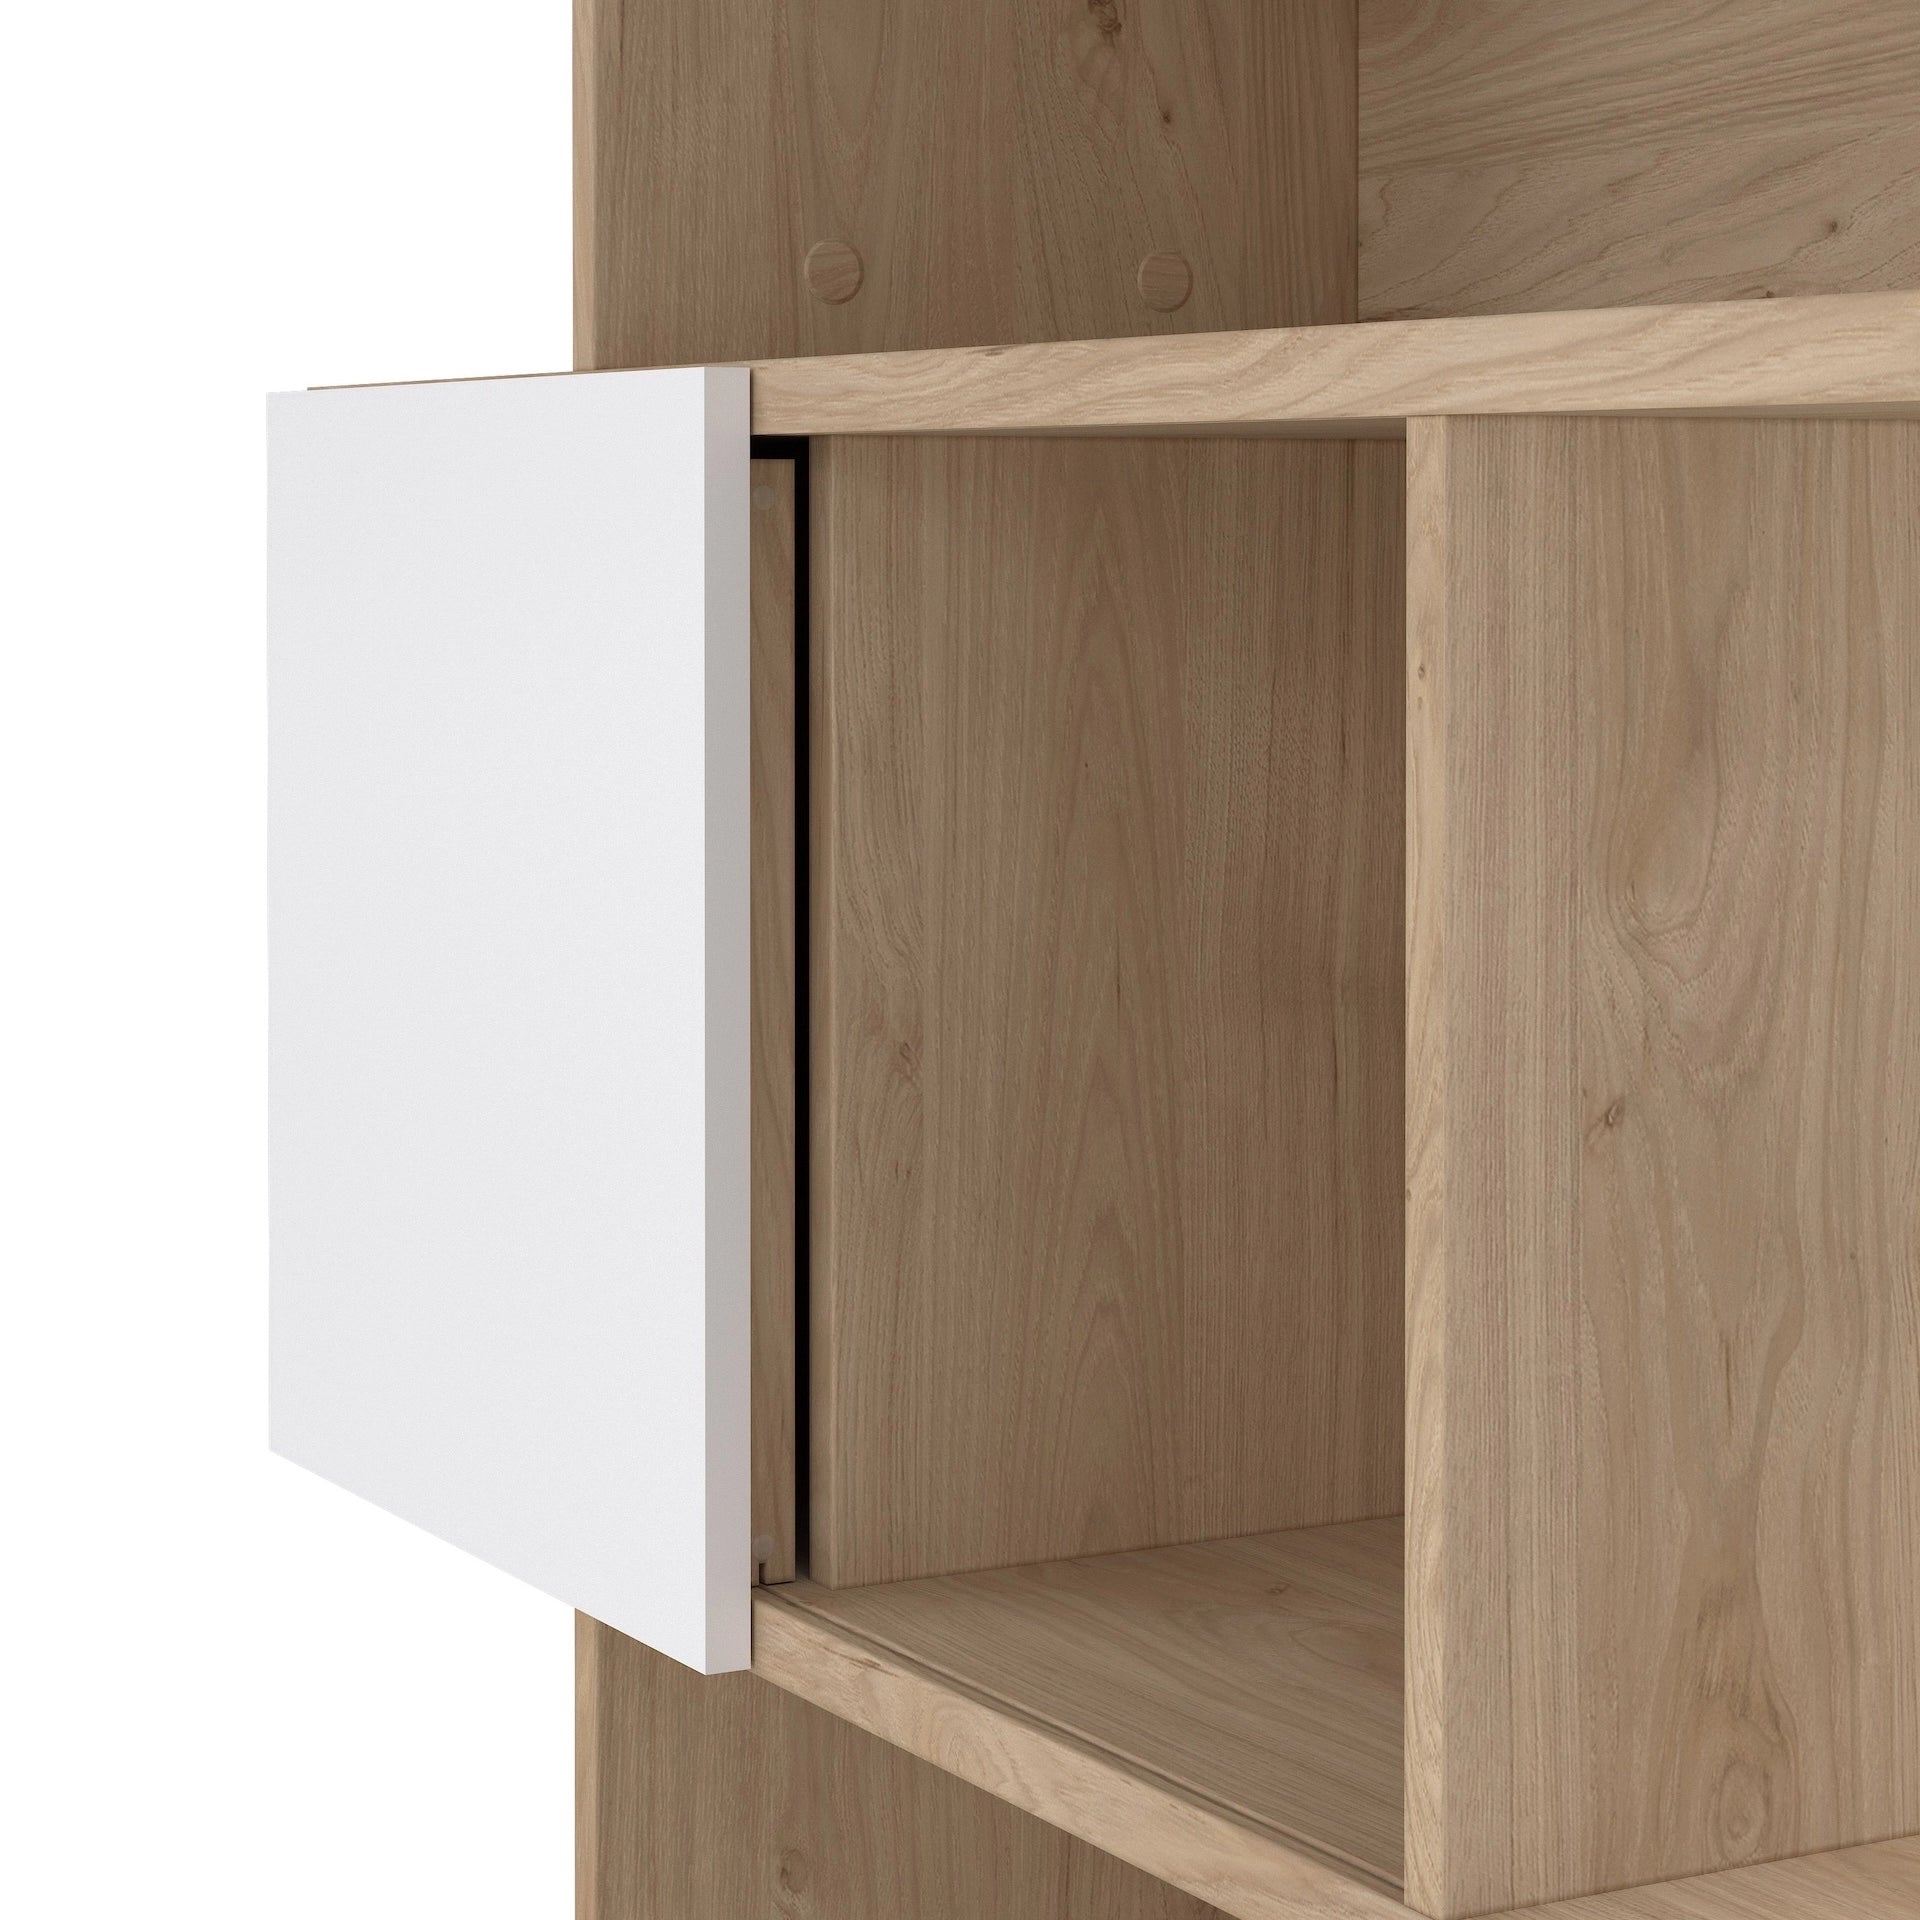 Furniture To Go Maze Asymmetrical Bookcase with 3 Doors in Jackson Hickory & White High Gloss